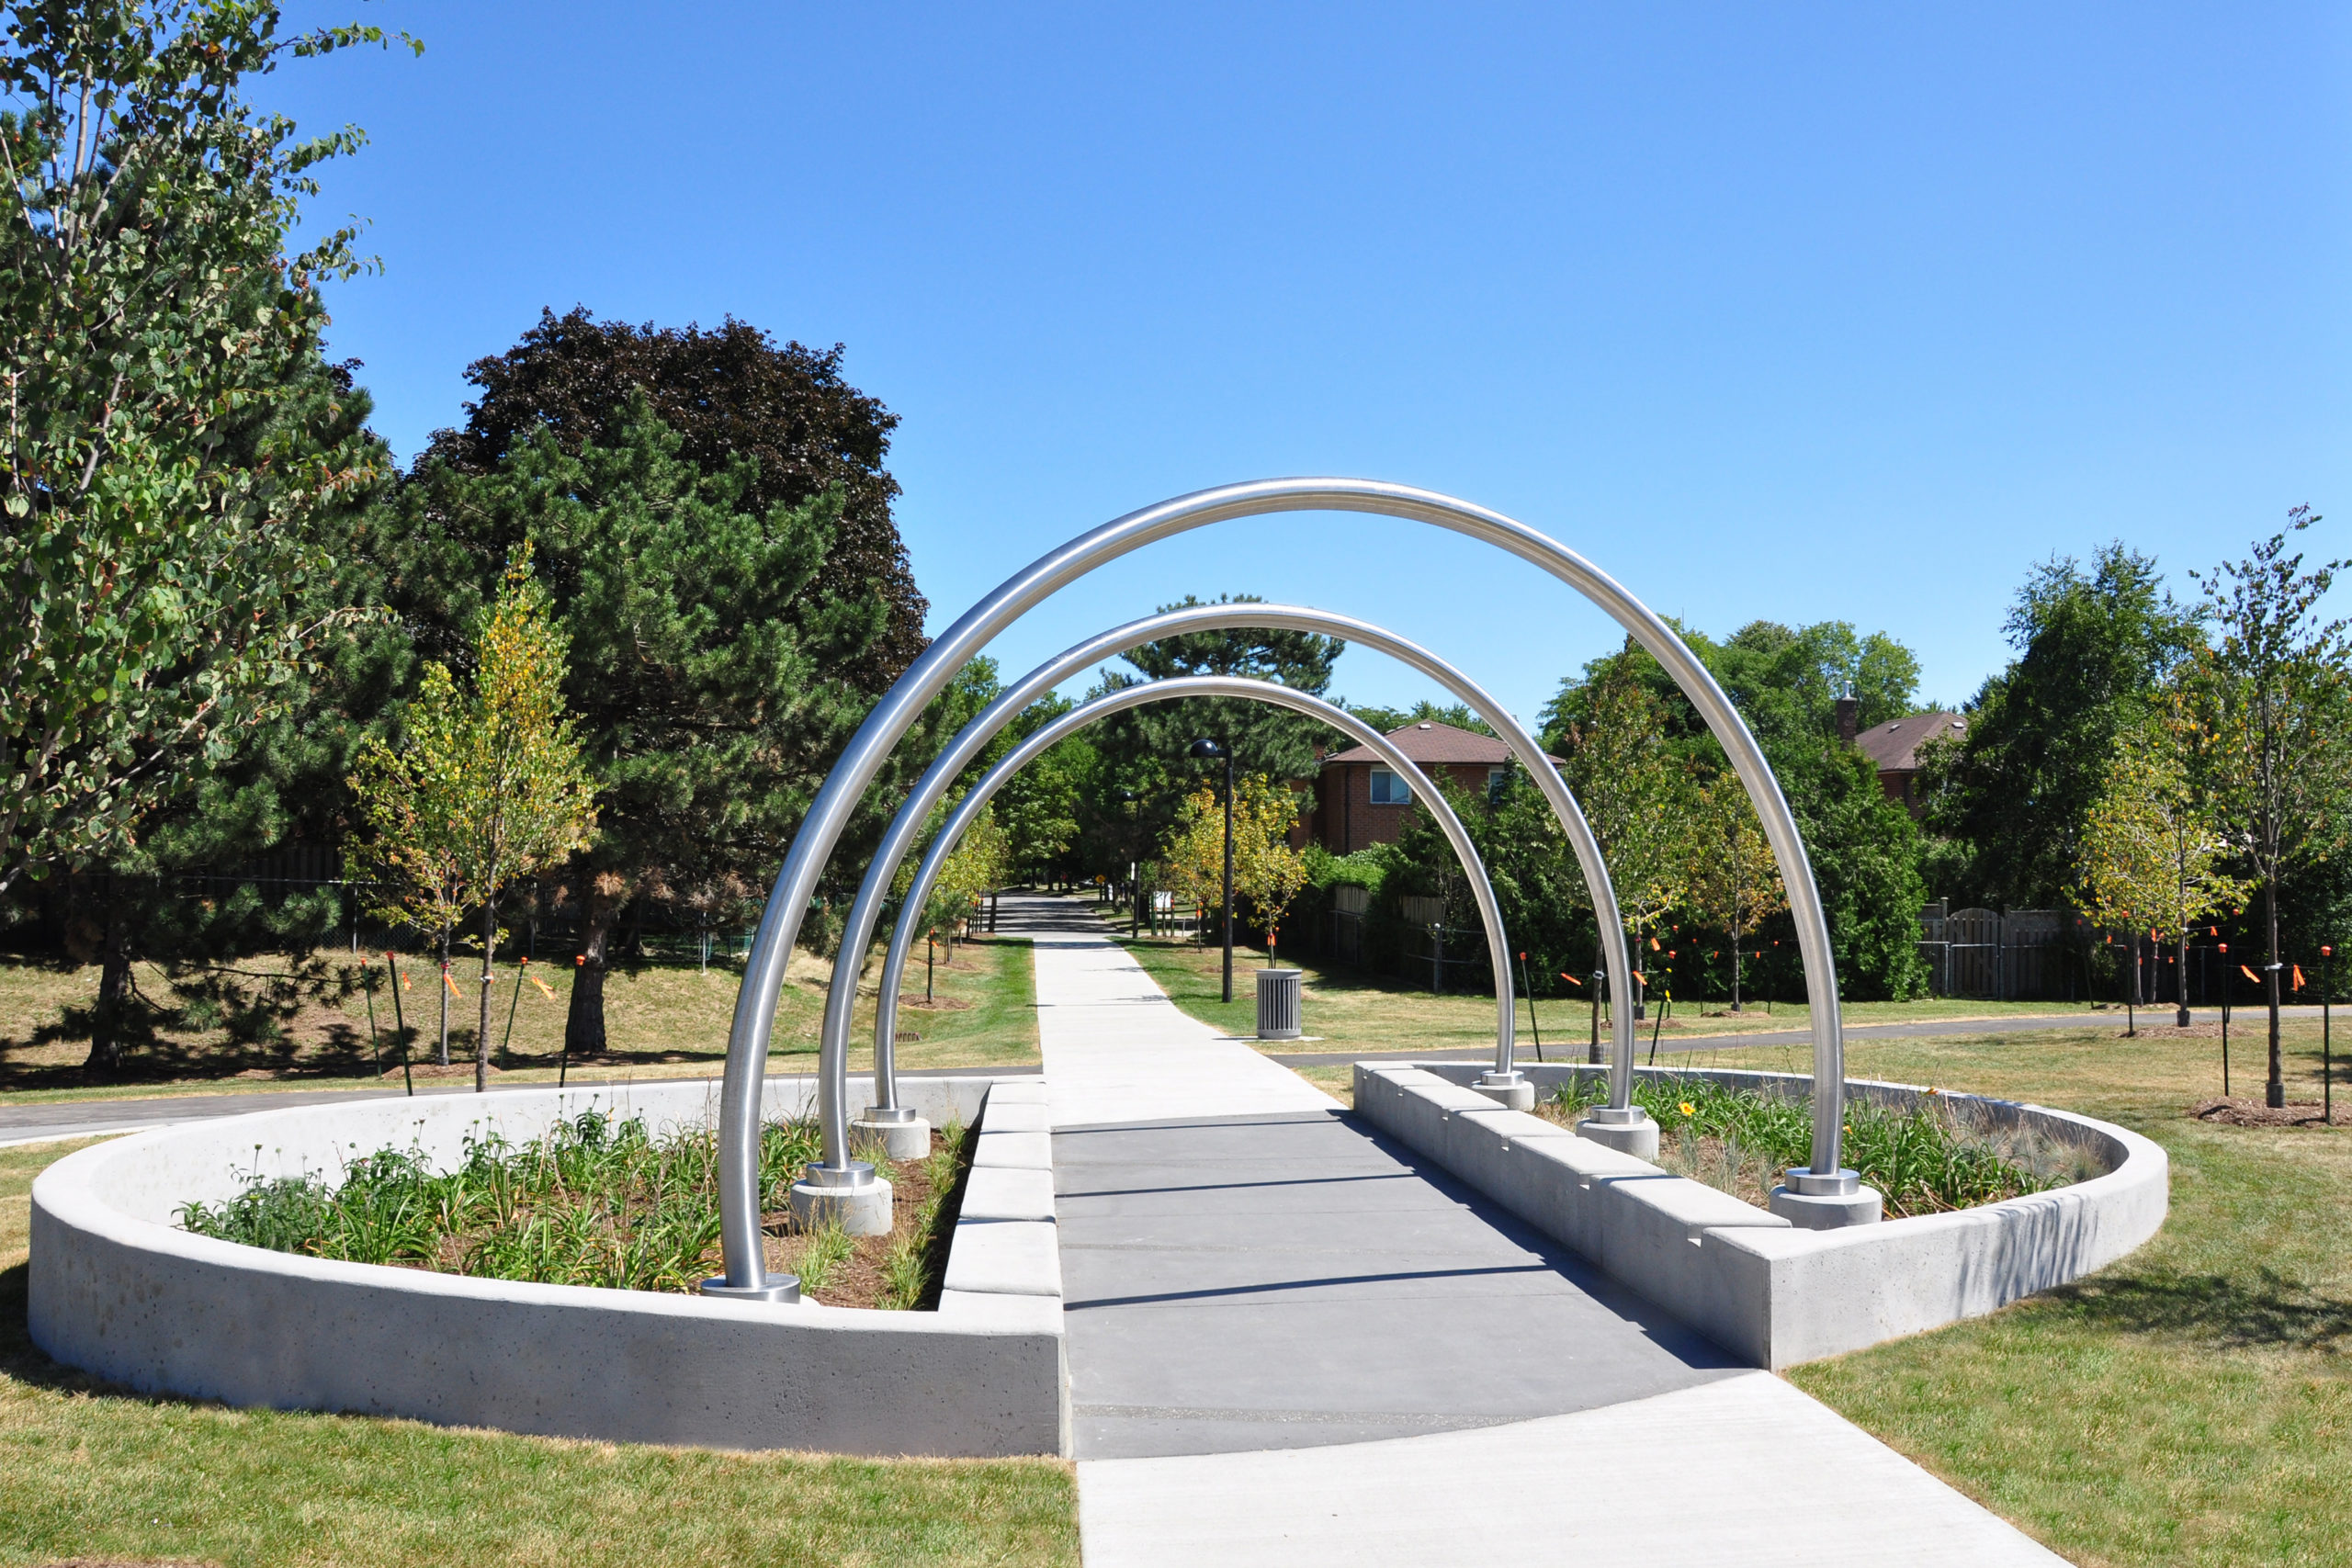 Pathway into park with metal loops.